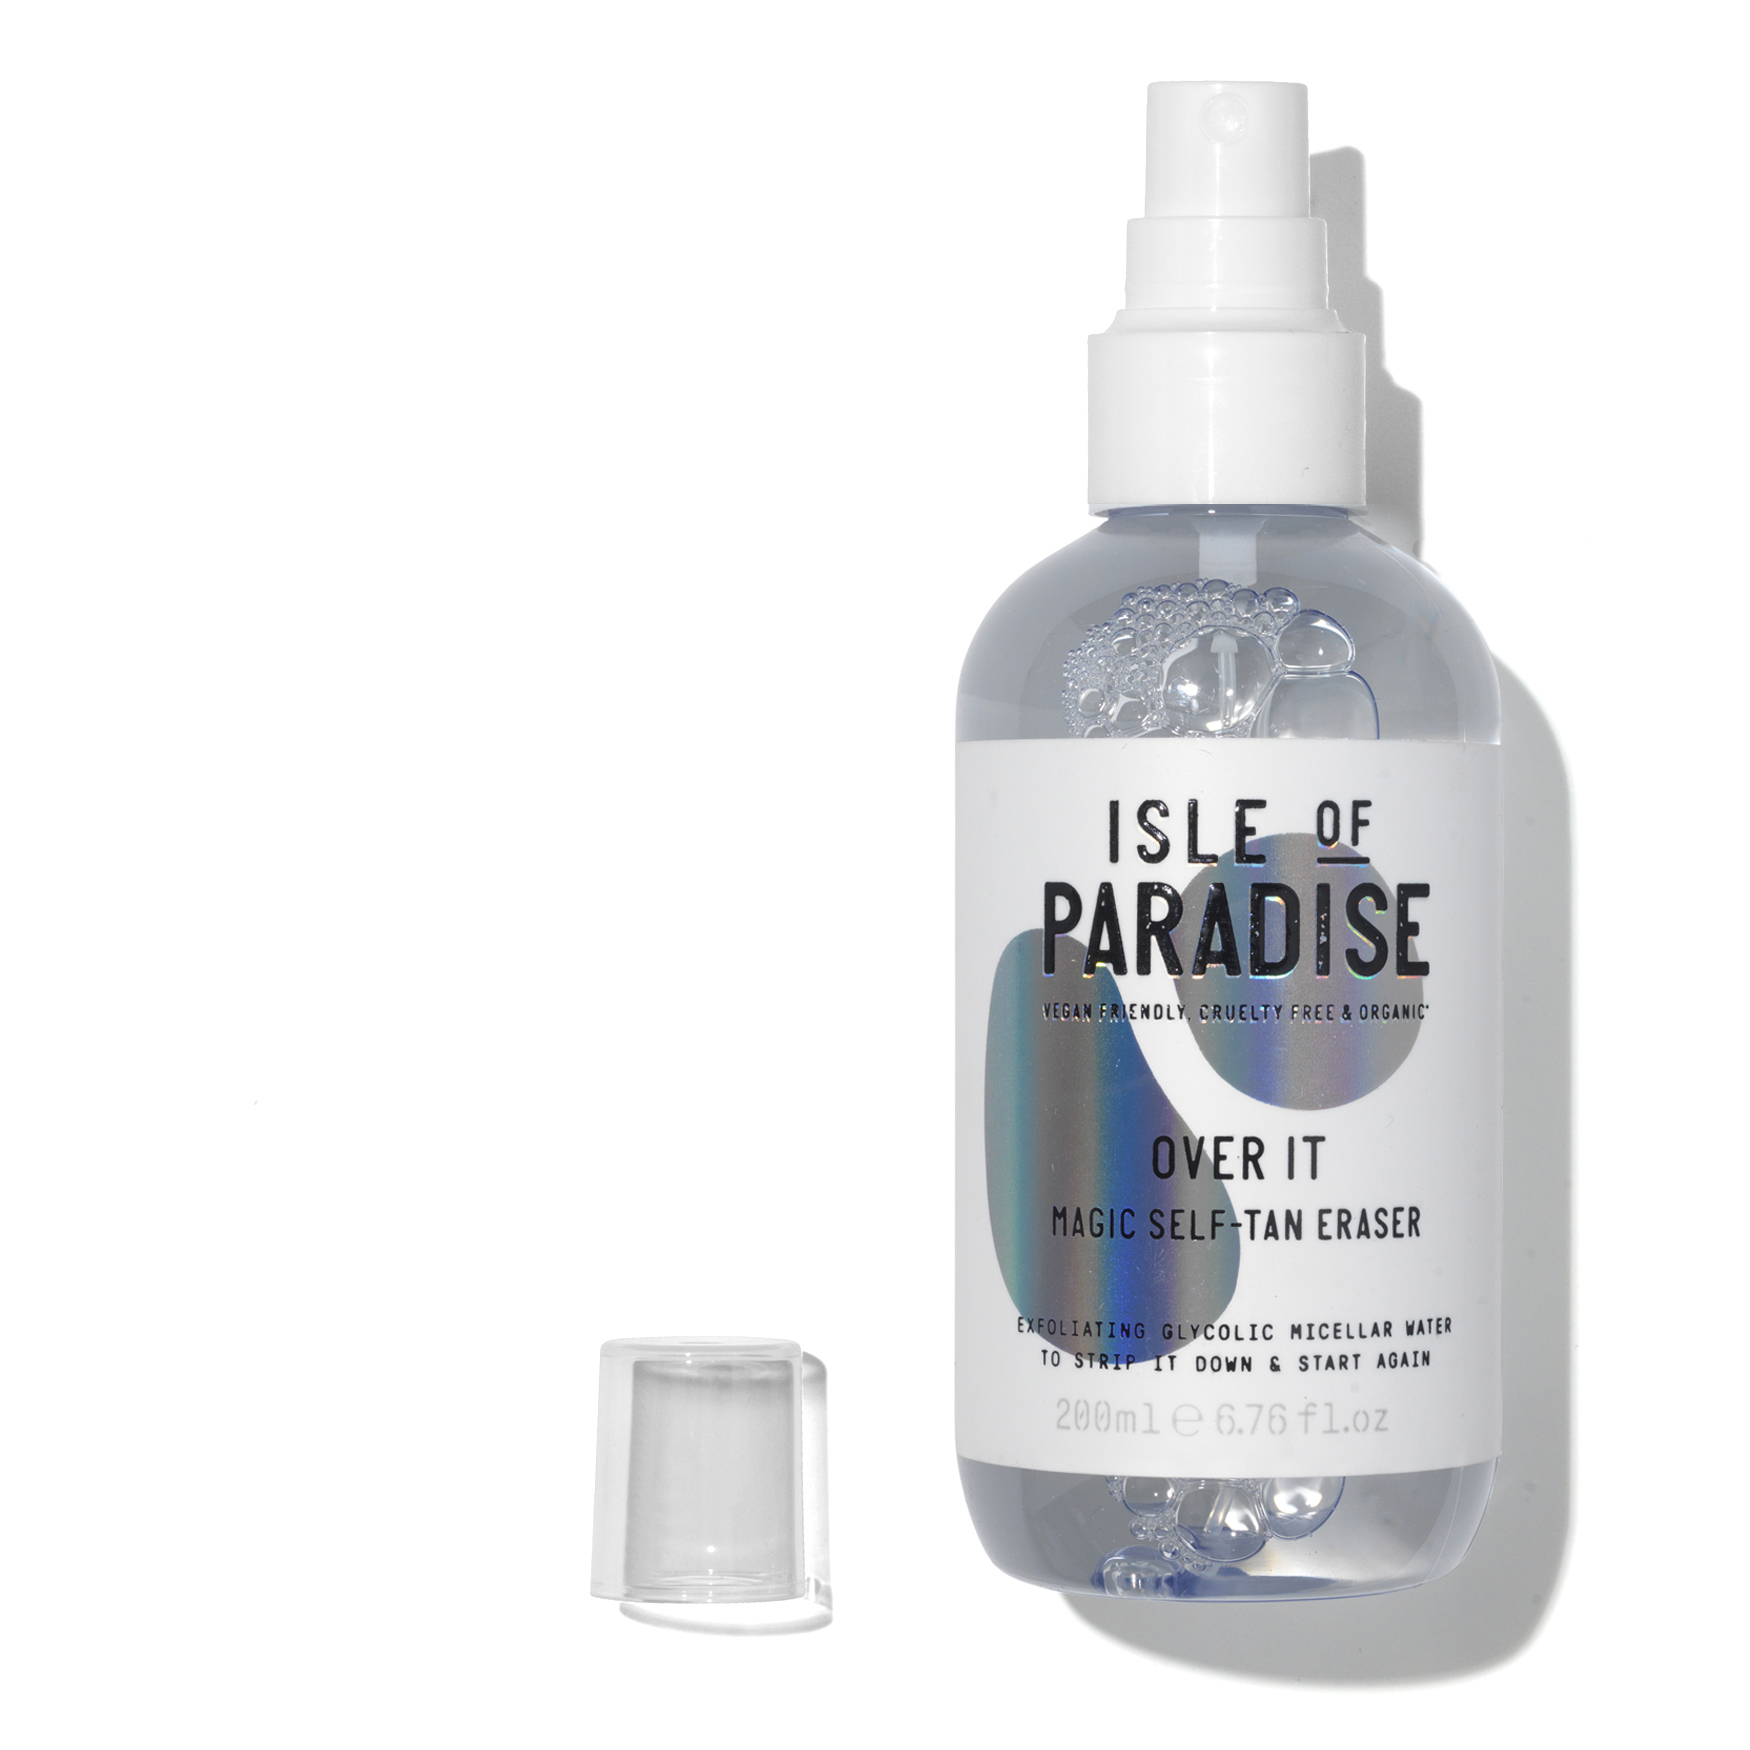 Isle of Paradise Over It | Space NK